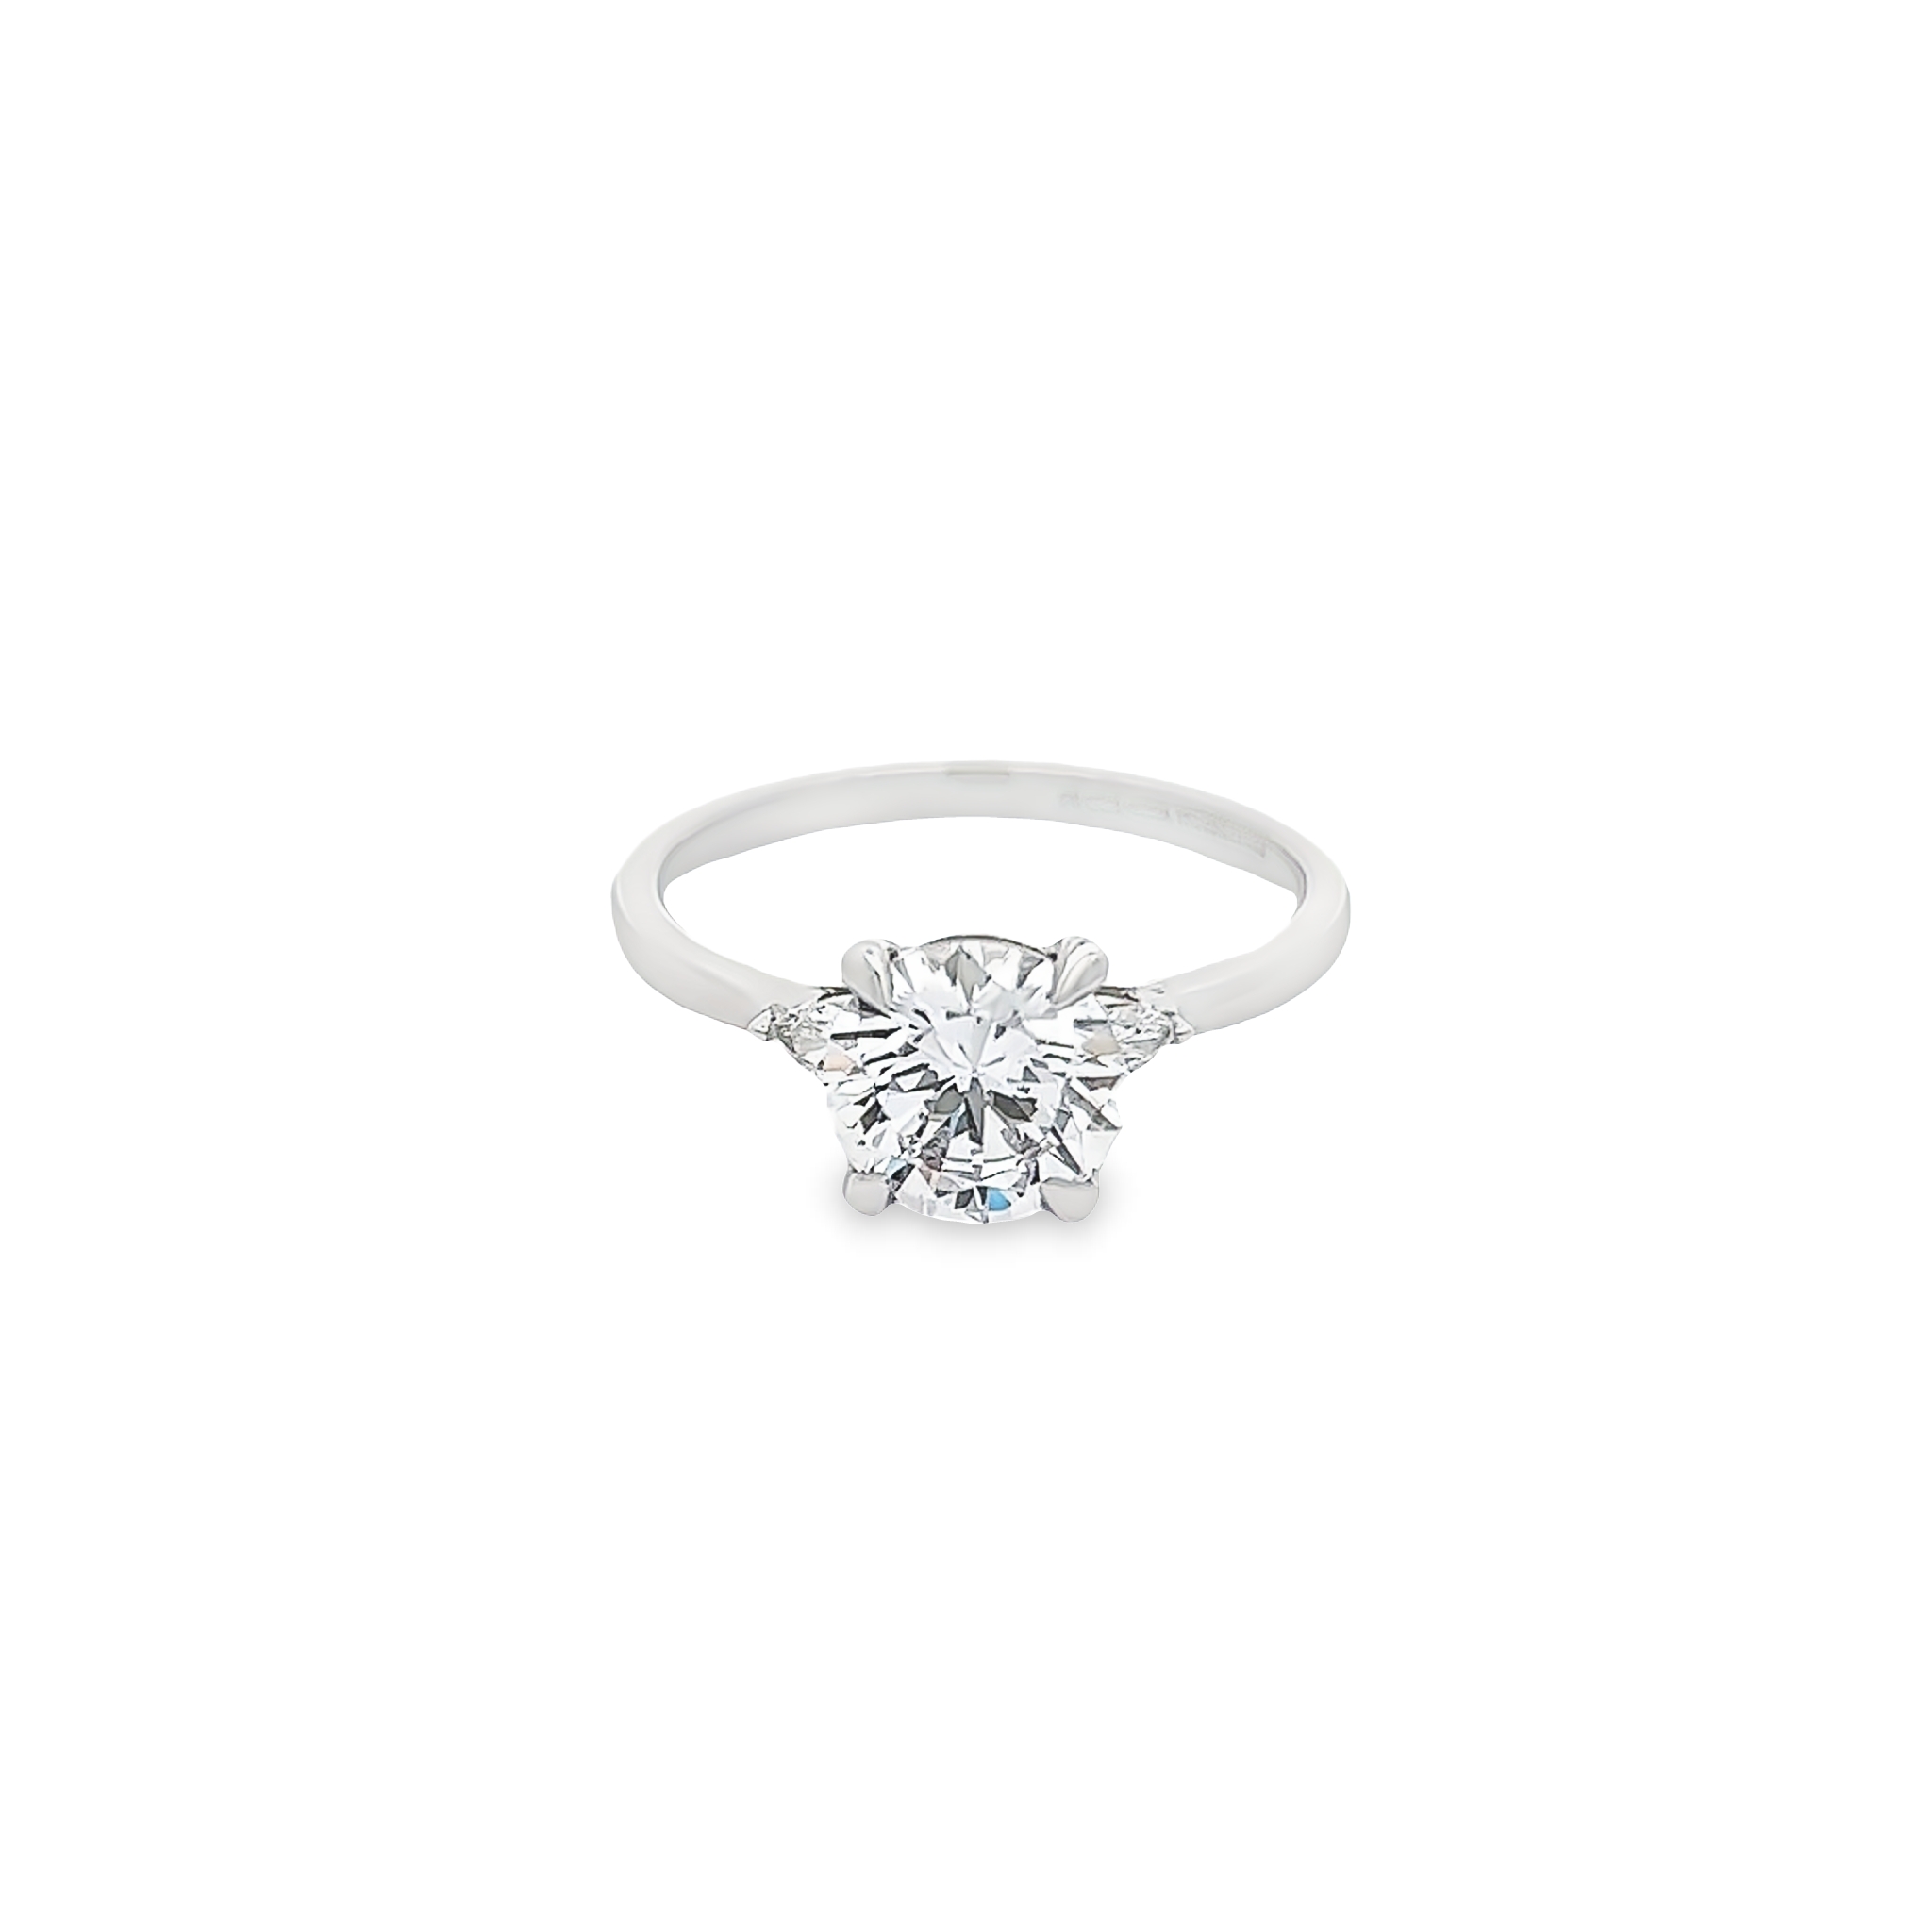 Platinum semi mount engagement ring with 4=0.19 total weight round brilliant and pear G VS Diamonds. Size 7